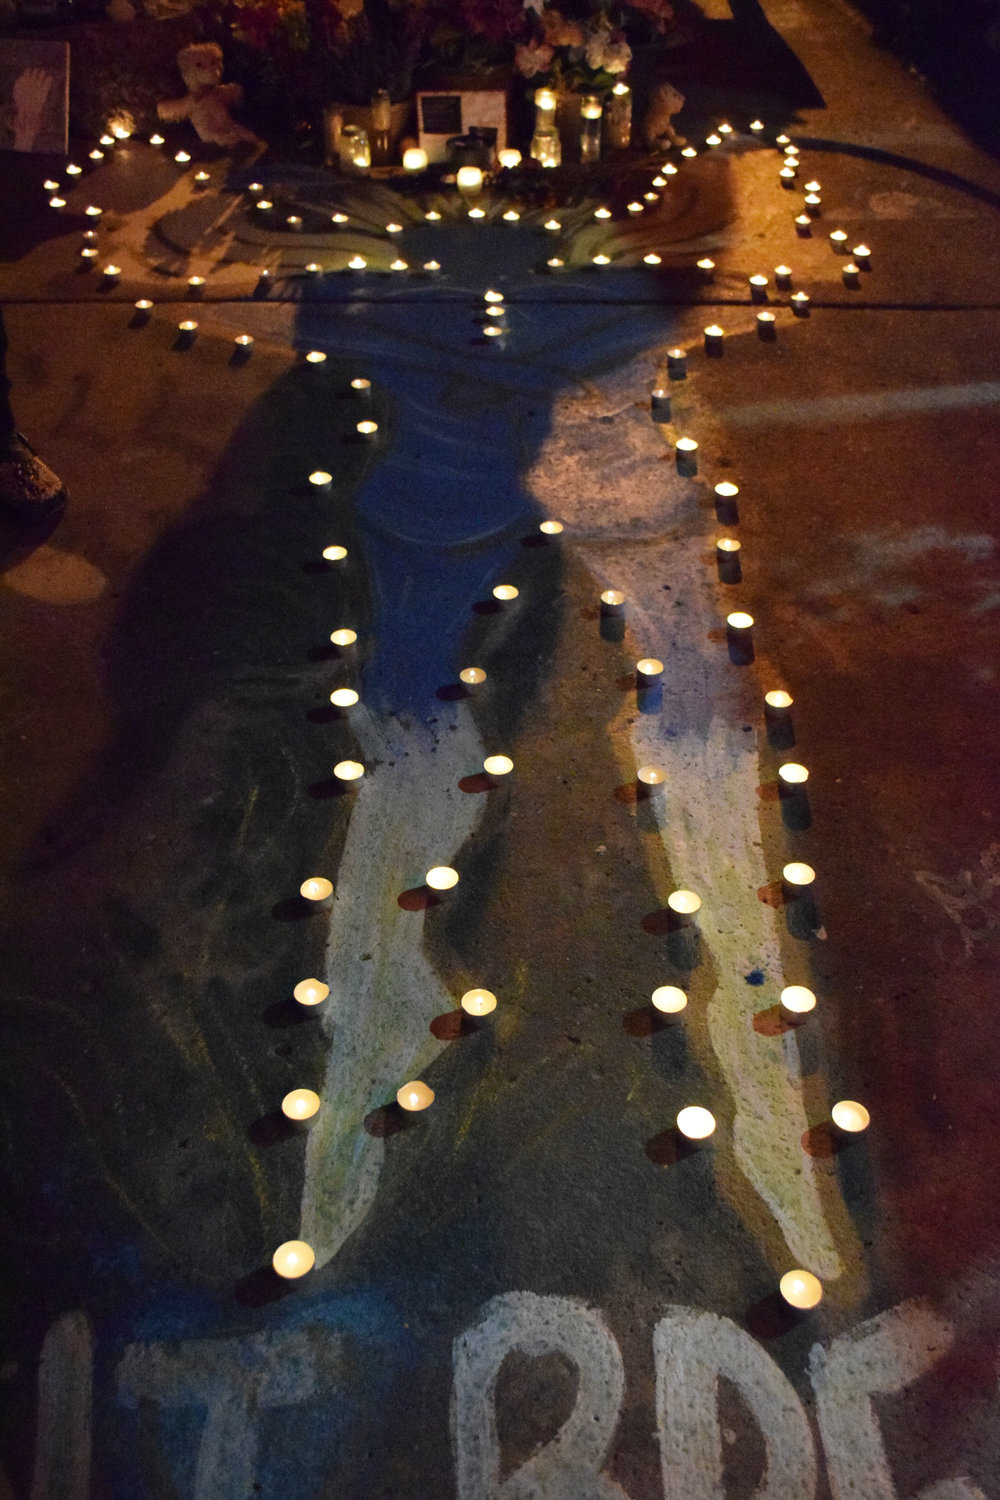 Community members place candles around the angel painted on the street in front of Cup Foods.